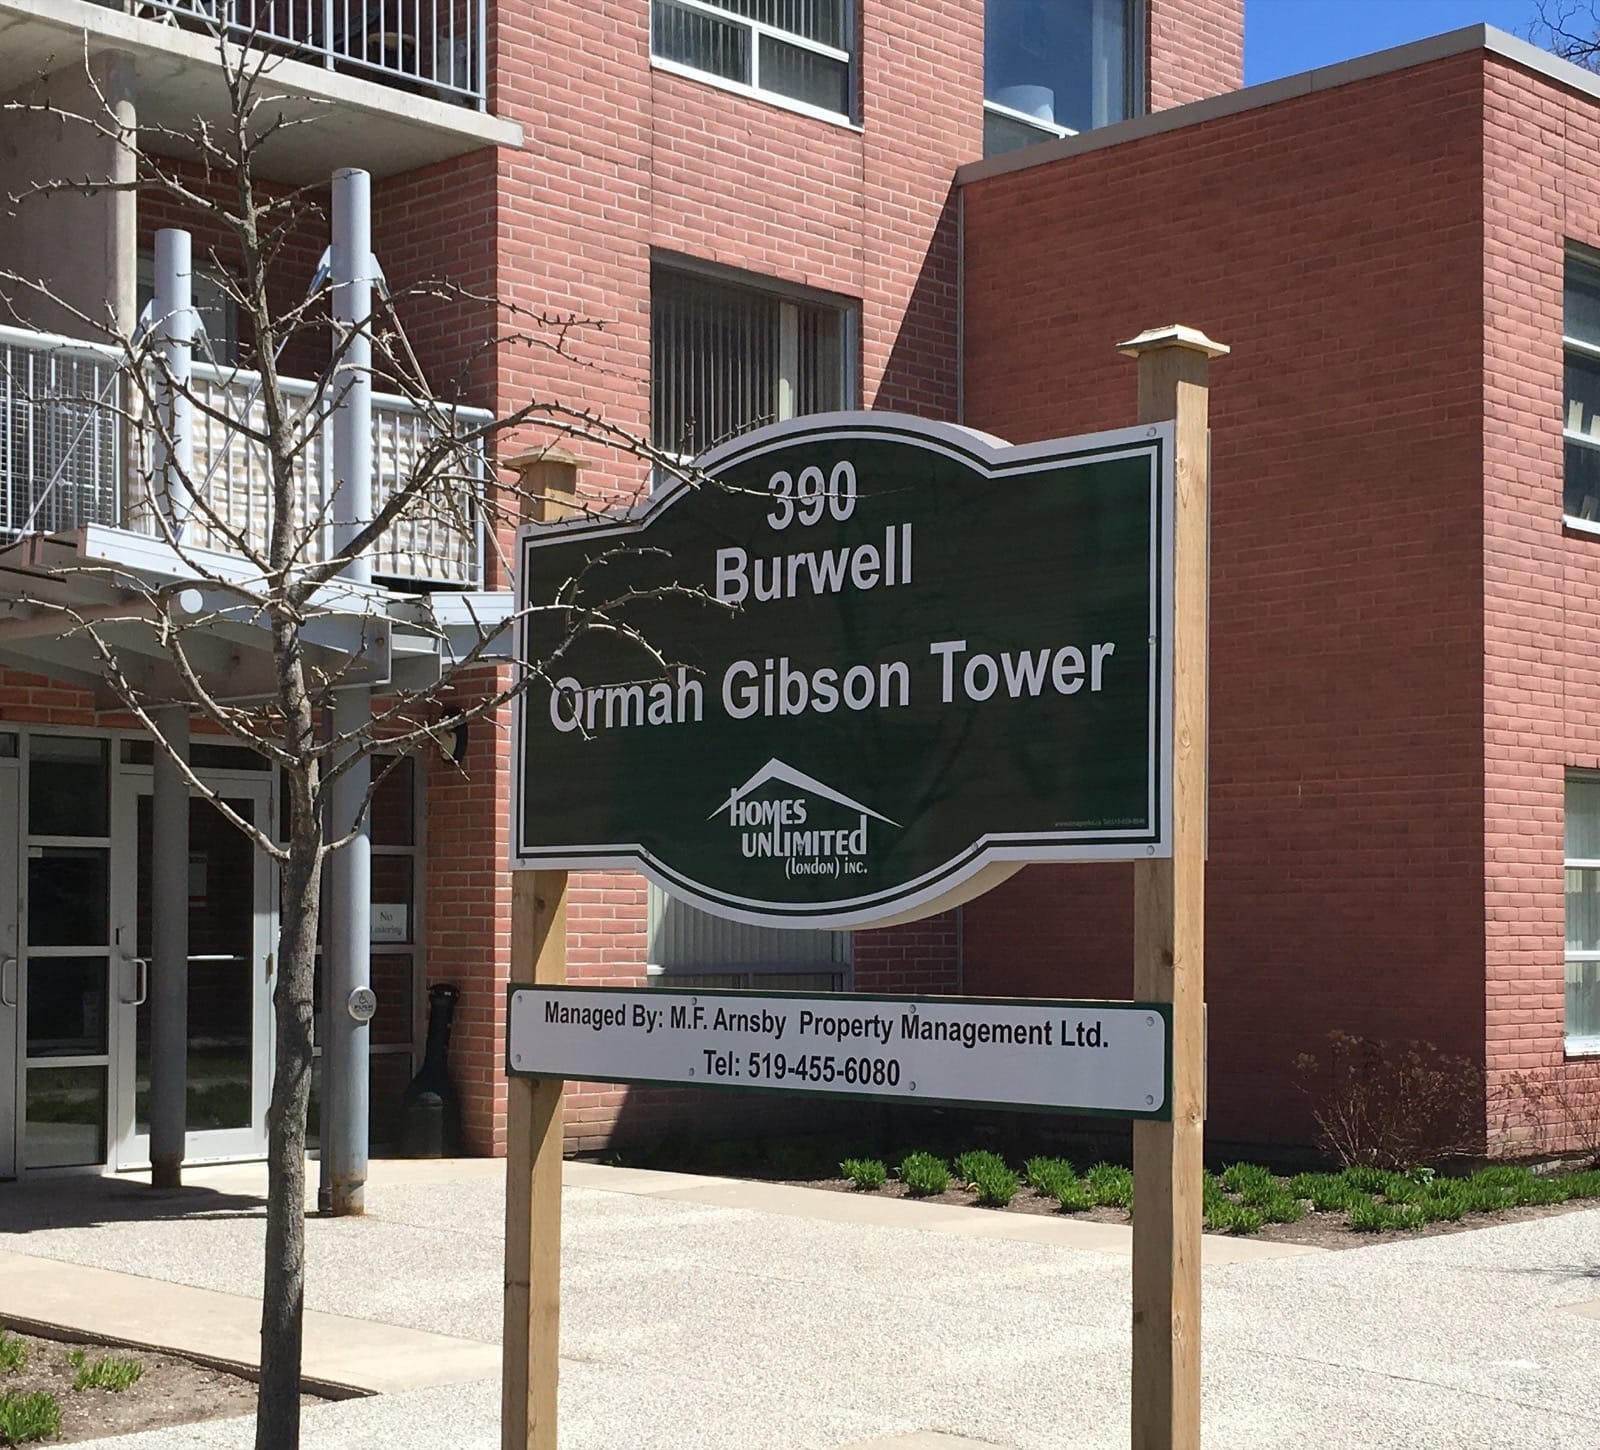 Ormah Gibson Tower